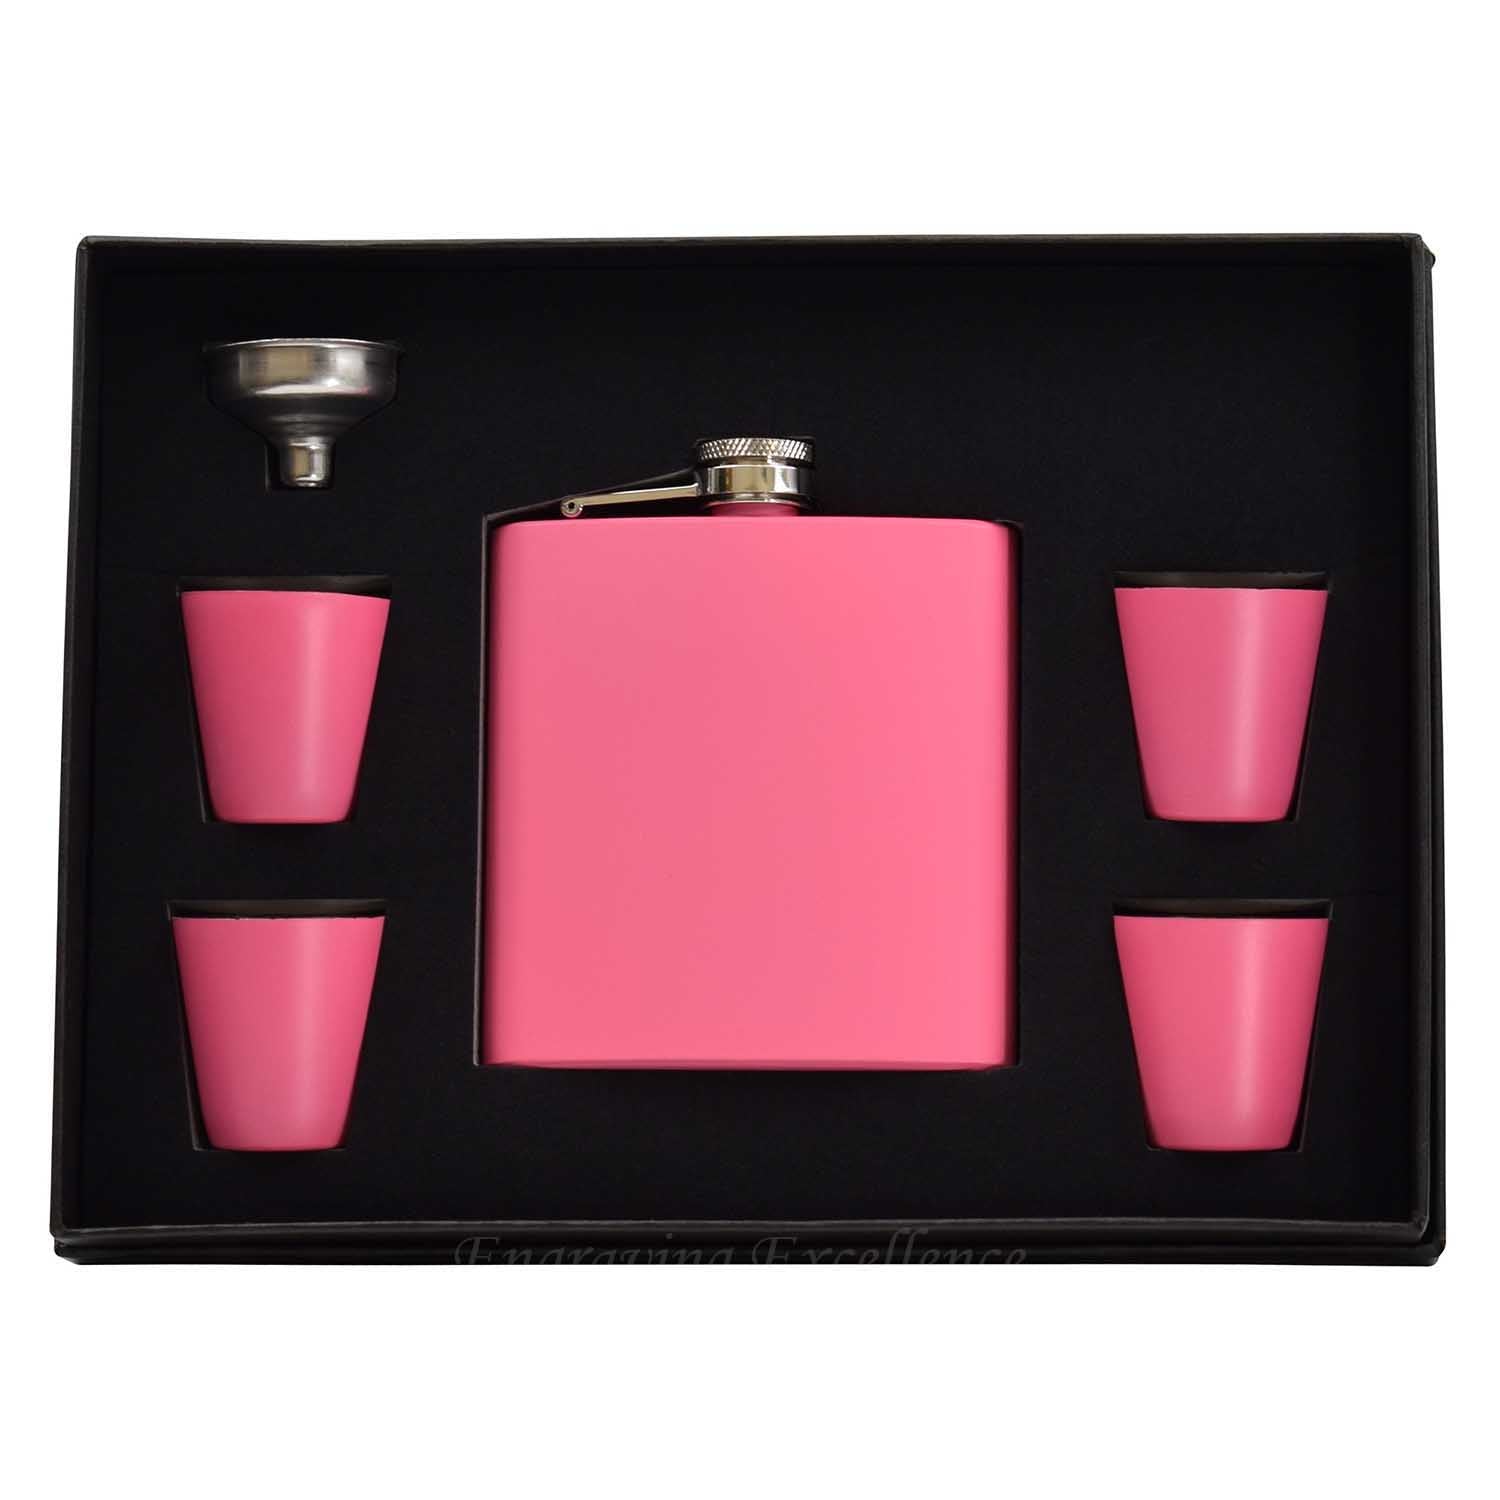 Pink 6oz Hip Flask in a Gift Box with Funnel and Cups